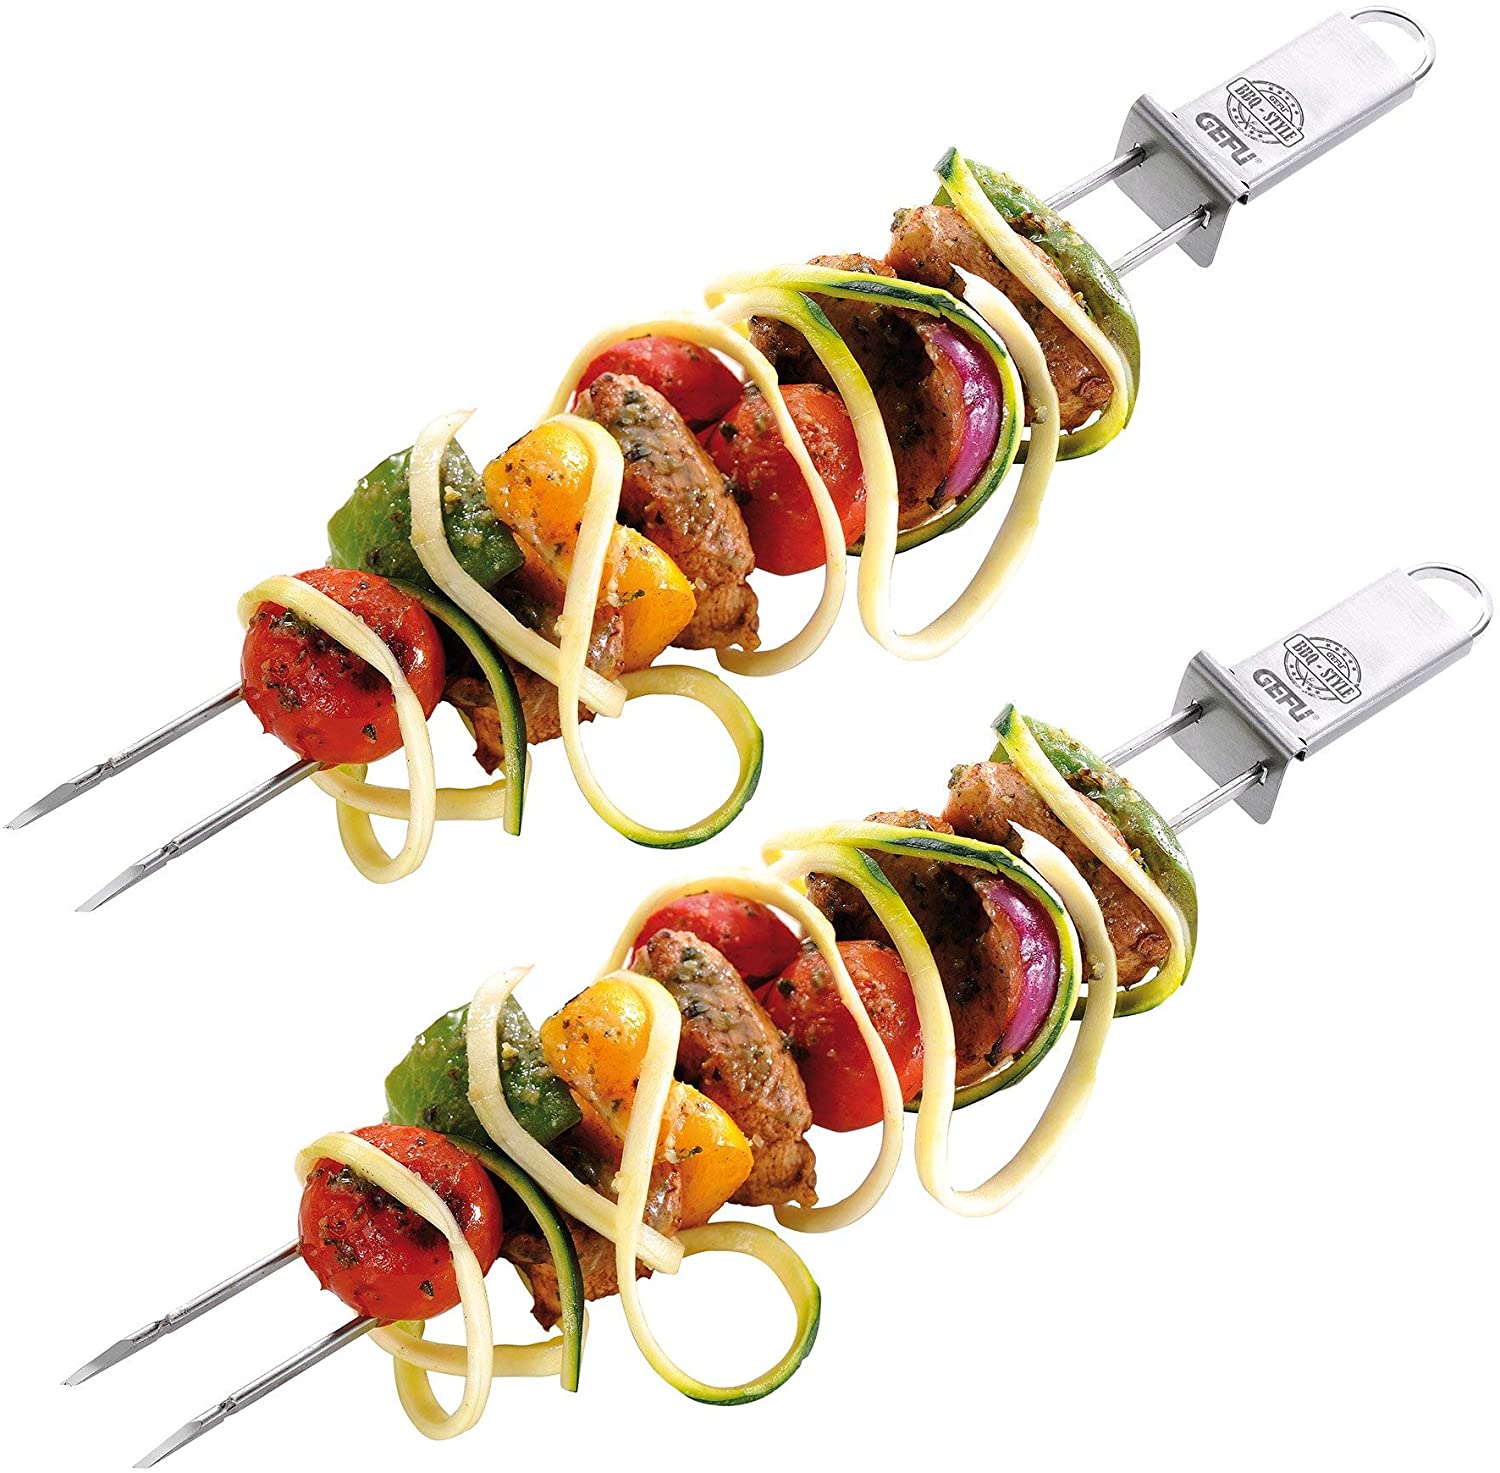 Gefu Barbecue Skewers Twinco, for Grill, 18/10 Stainless Steel, 2 Pieces, 15420